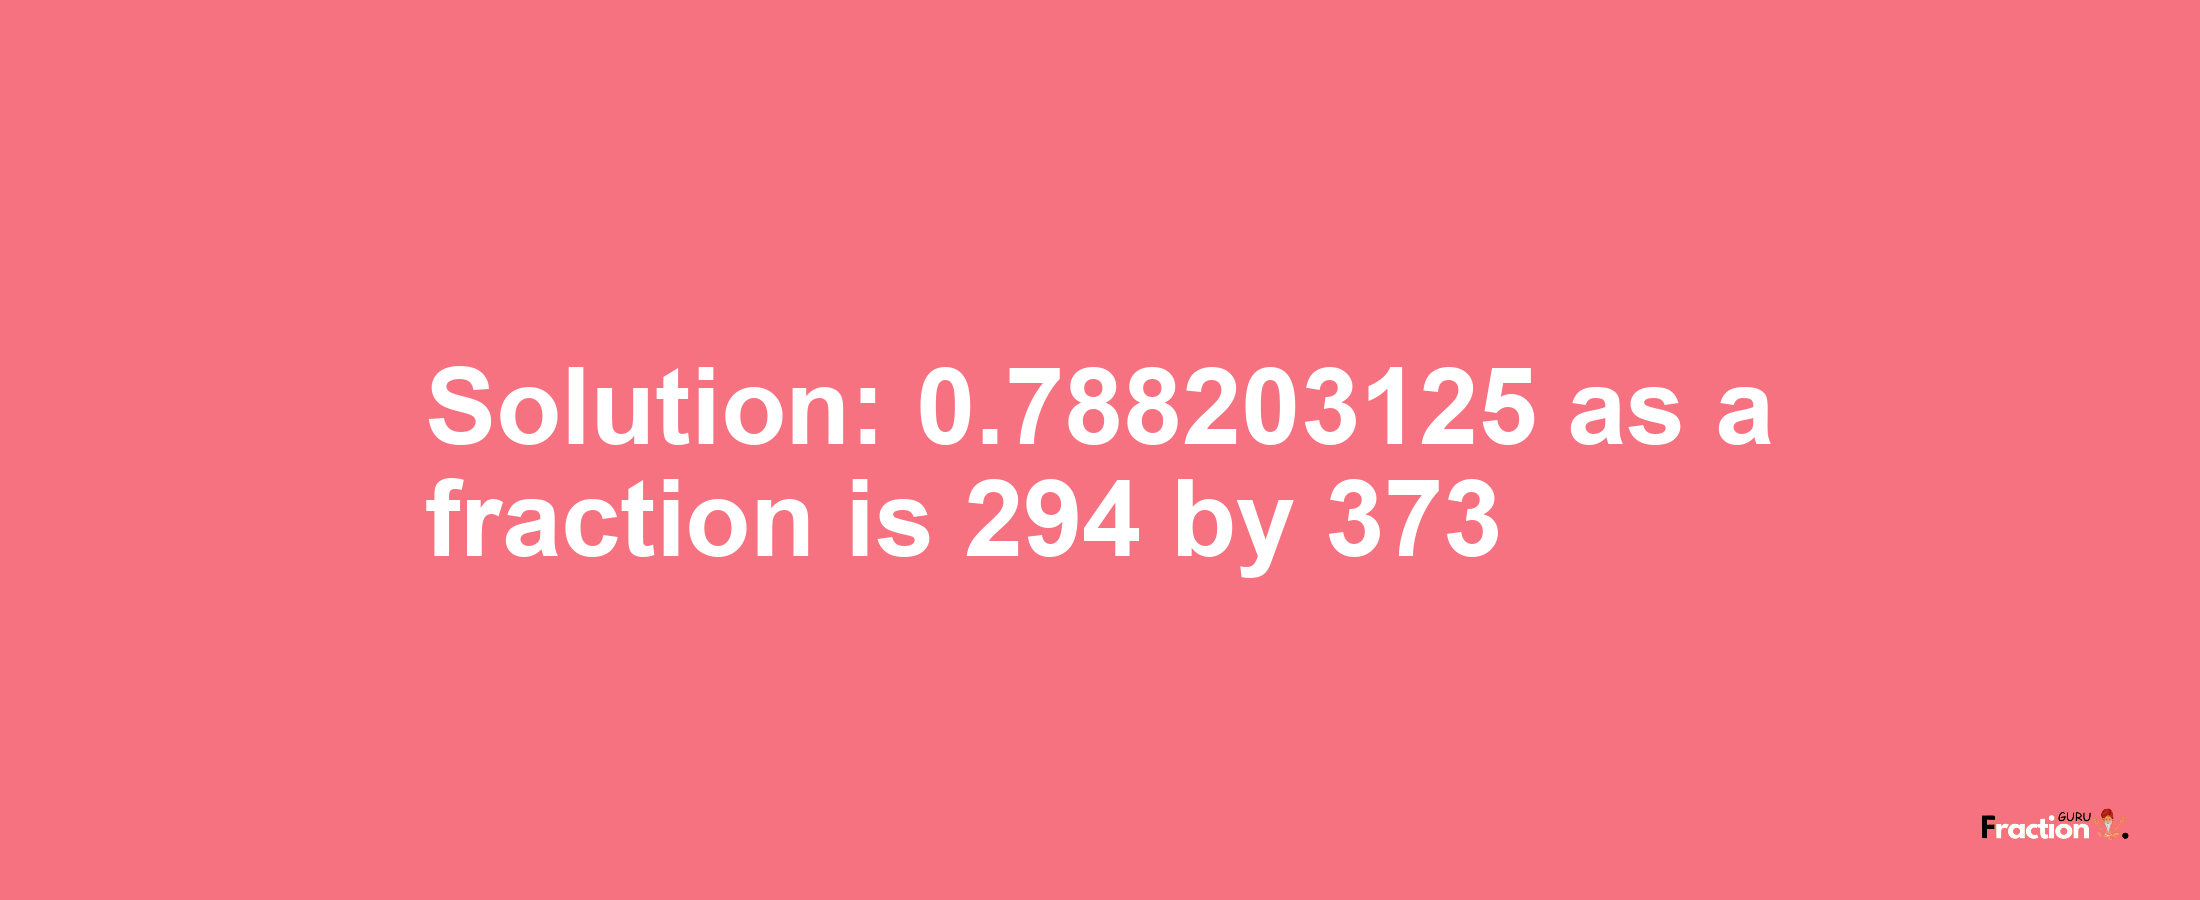 Solution:0.788203125 as a fraction is 294/373